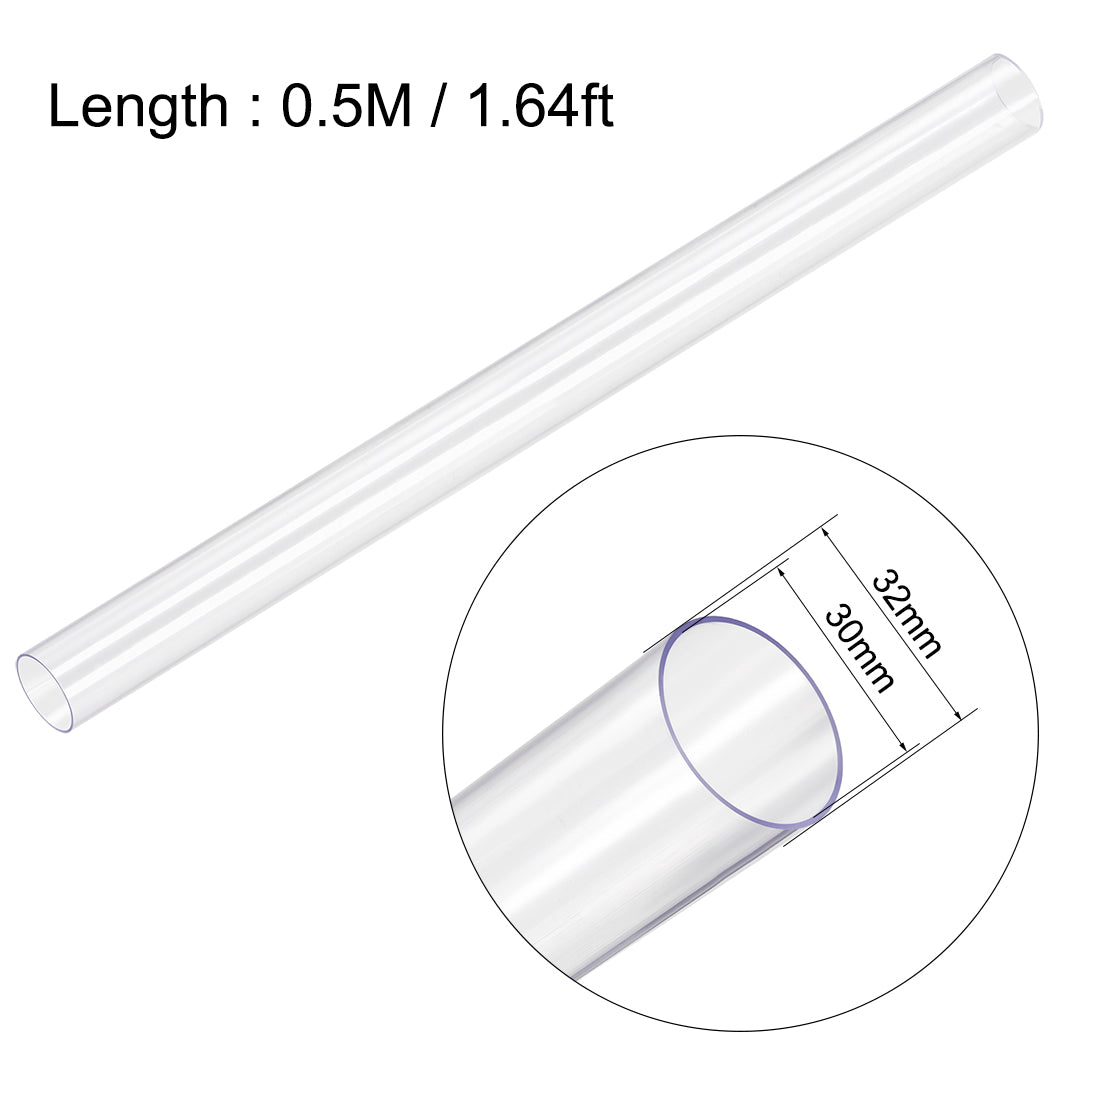 uxcell Uxcell PVC Rigid Round Tubing,Clear,30mm ID x 32mm OD,0.5M/1.64Ft Length